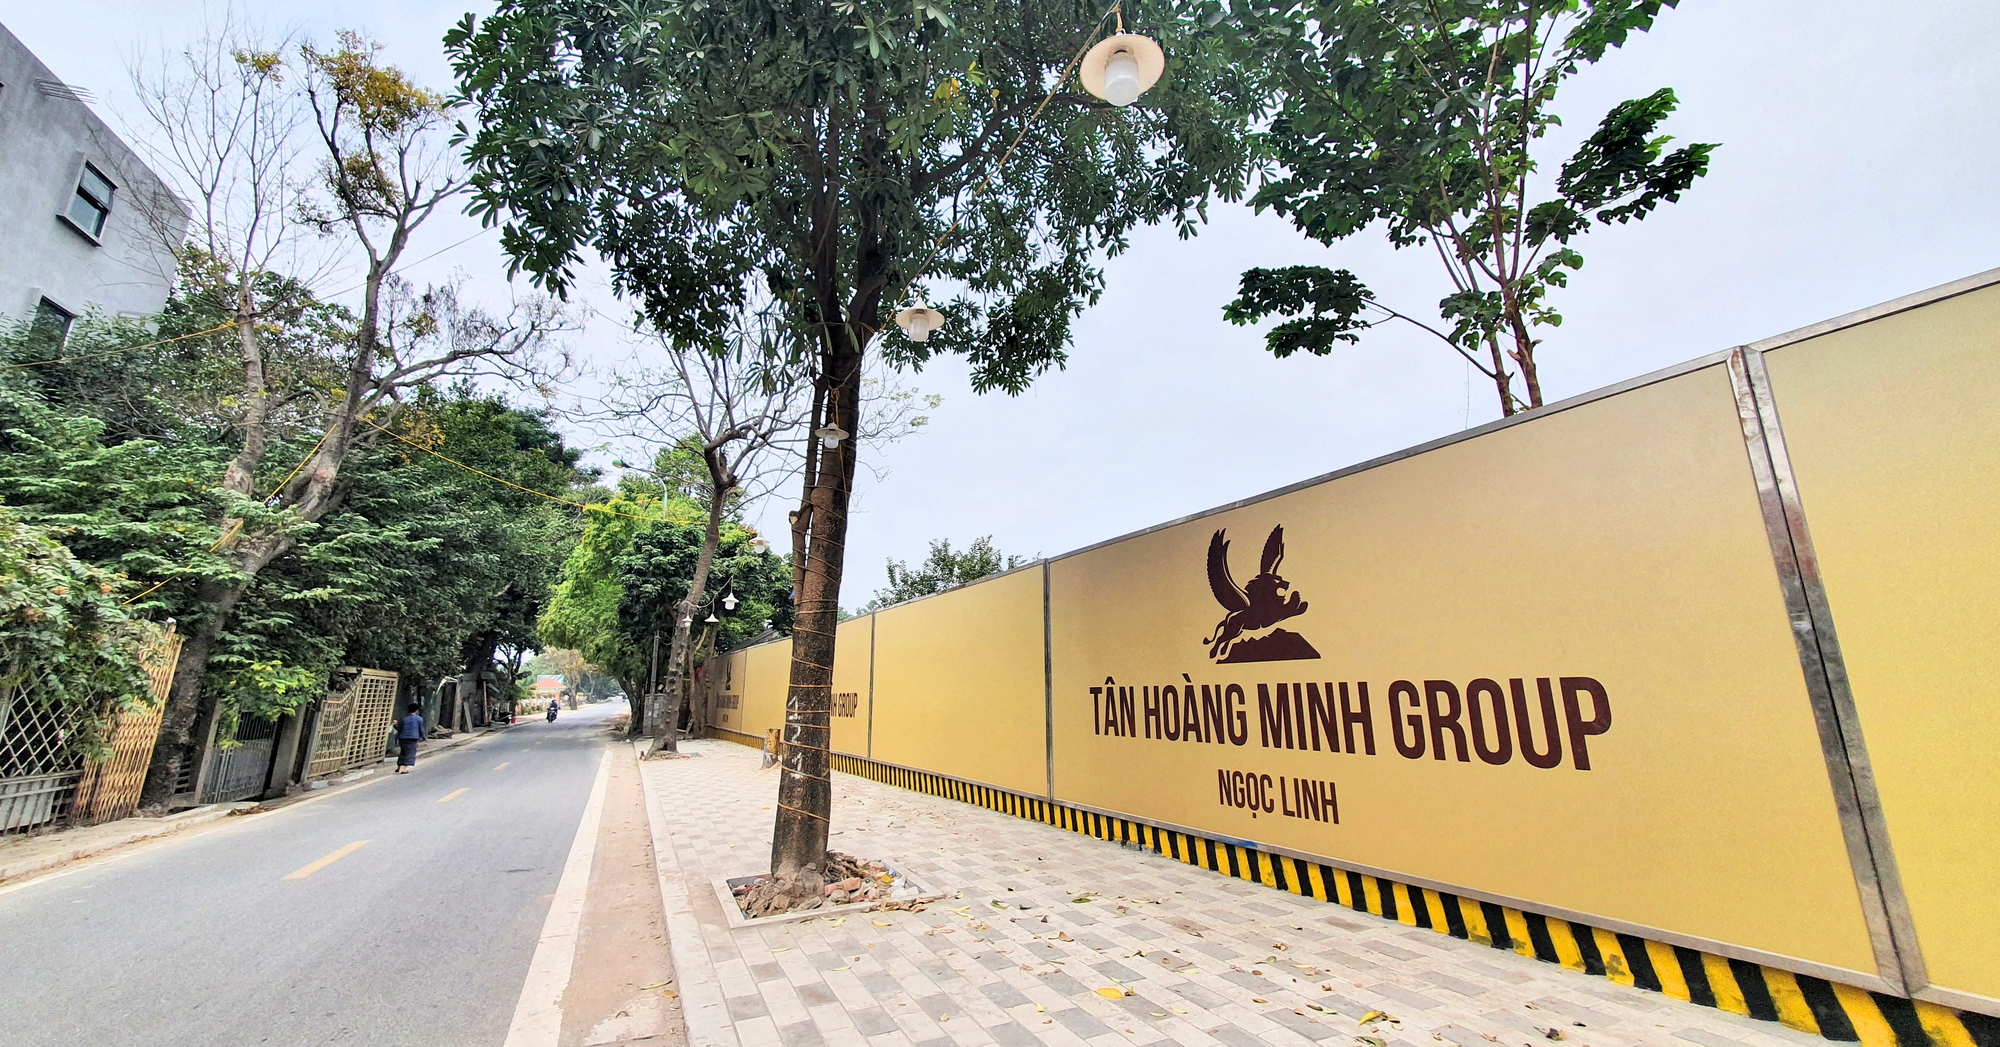 Information on refunding money to investors in the case of “Tan Hoang Minh bonds”